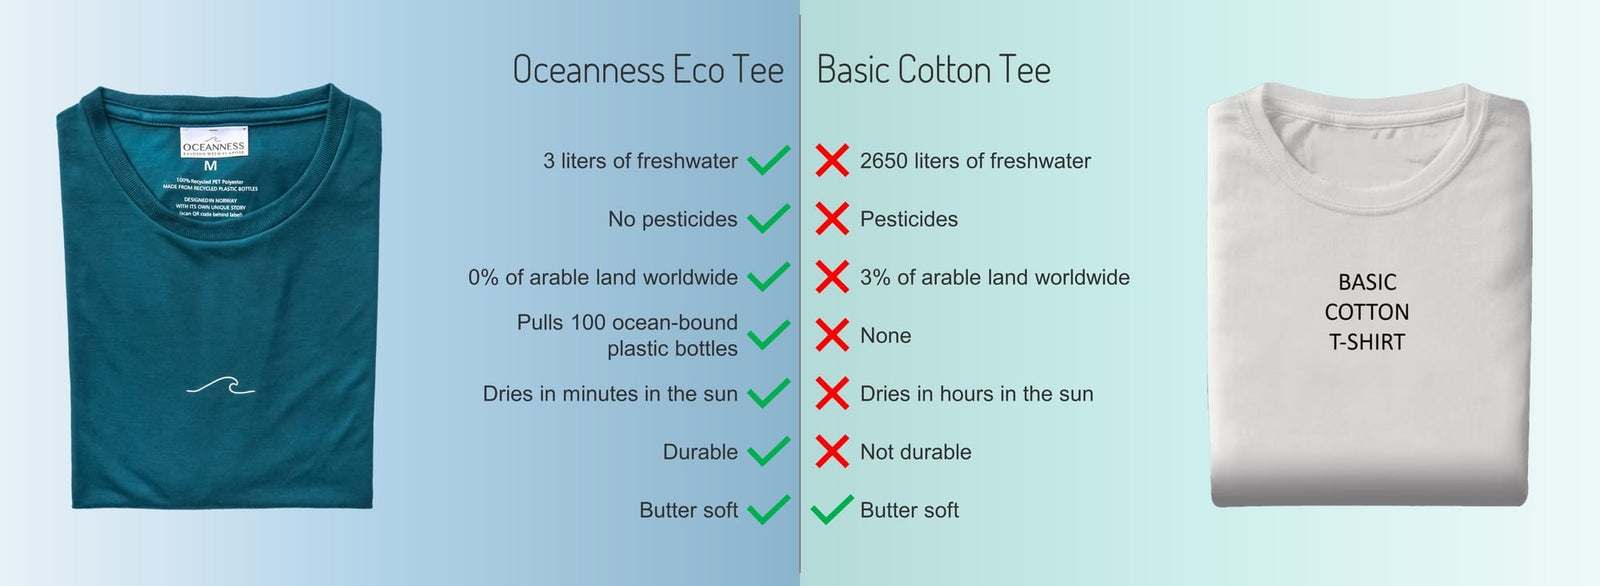 Recycled Polyester vs Cotton: Which Is More Eco-Friendly?